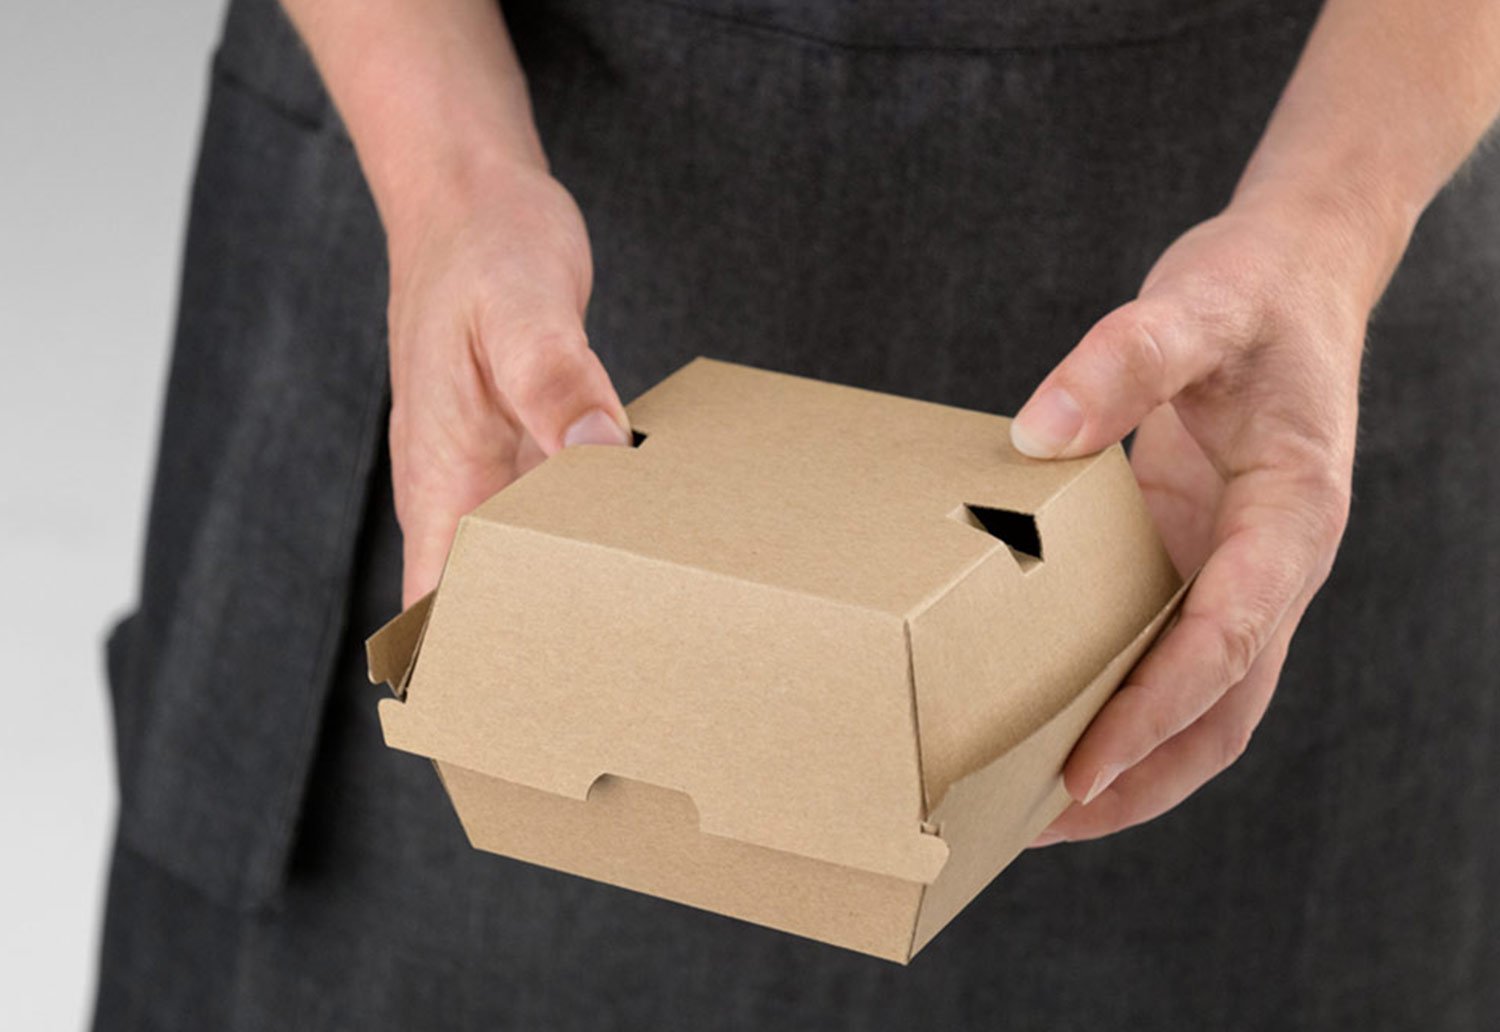 Image of sustainable packaging by Detpak